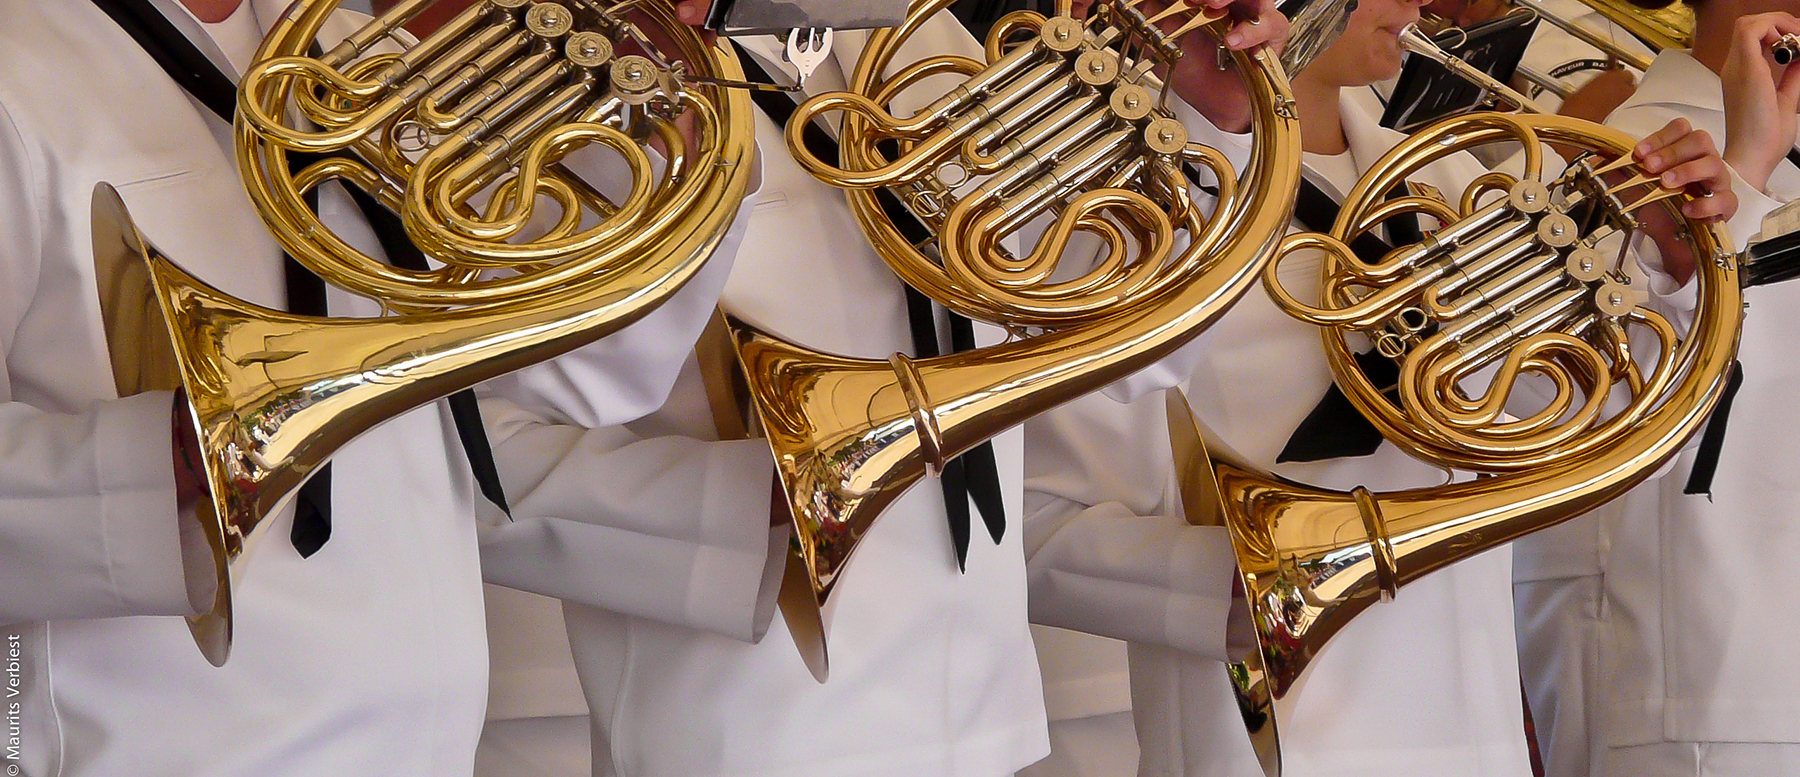 The Brass Instrument Family: French Horns, Trombones, Low Brass